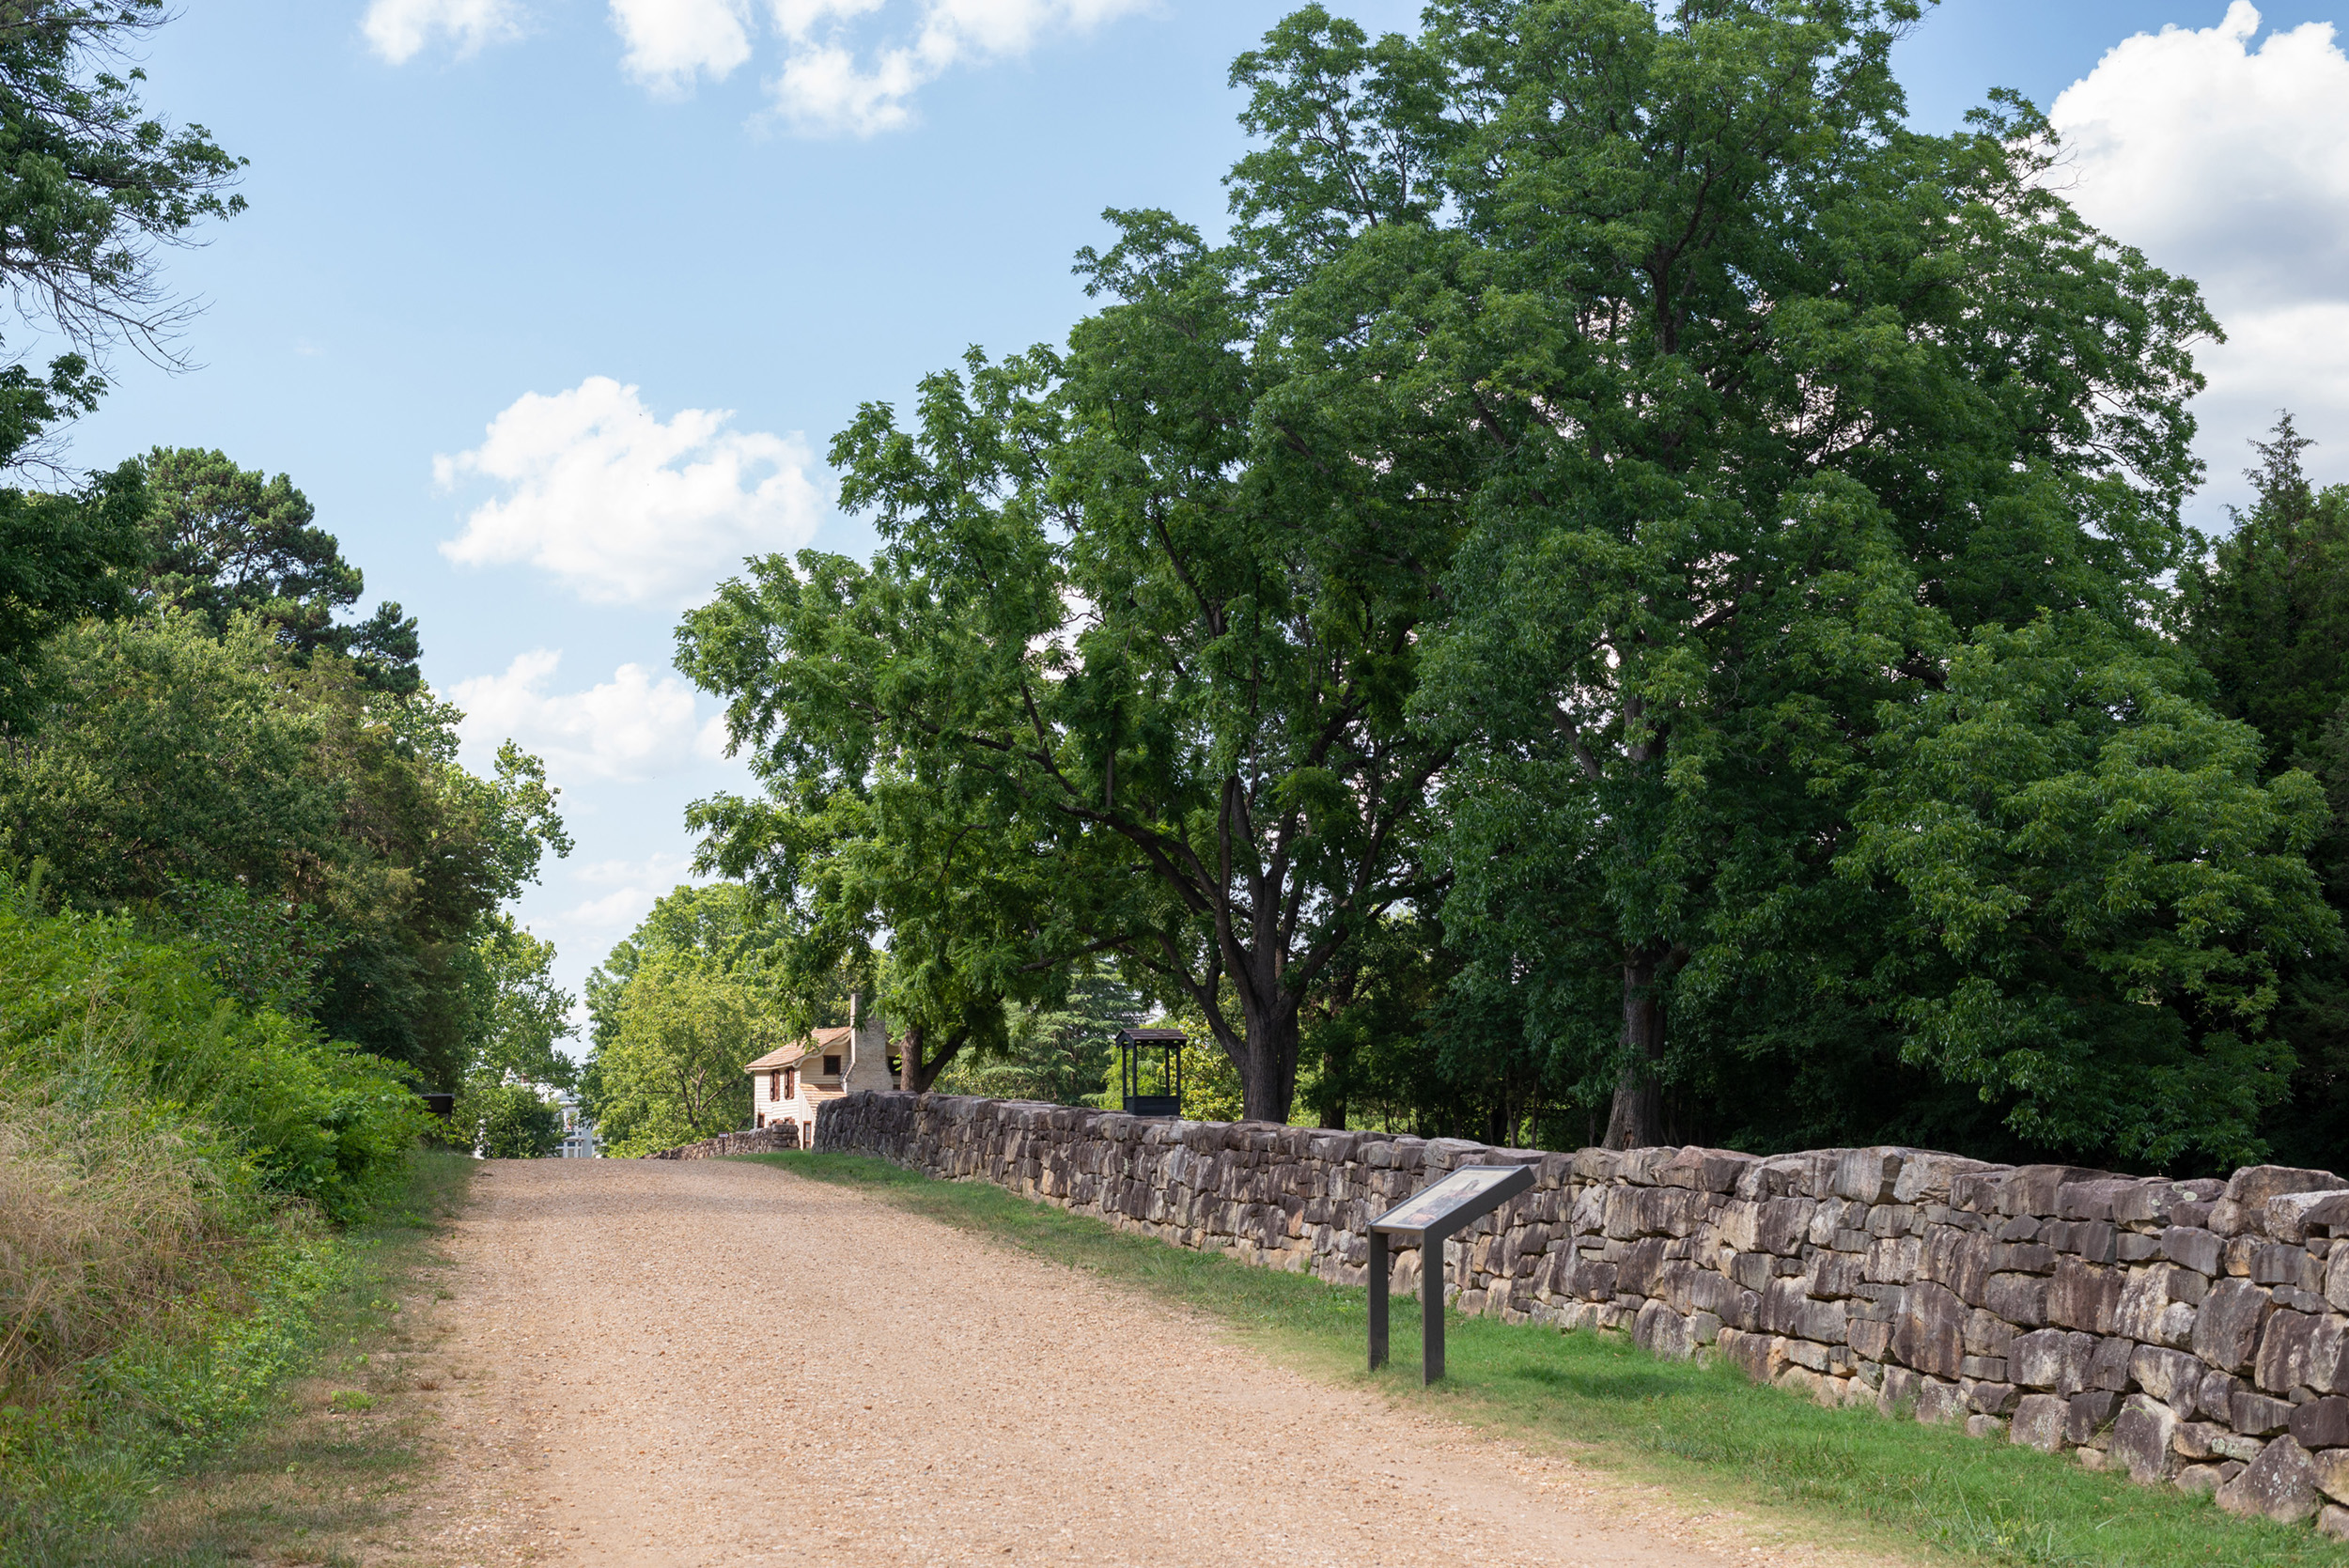 A gravel road bordered by a stone wall with a small, white house in the distance.